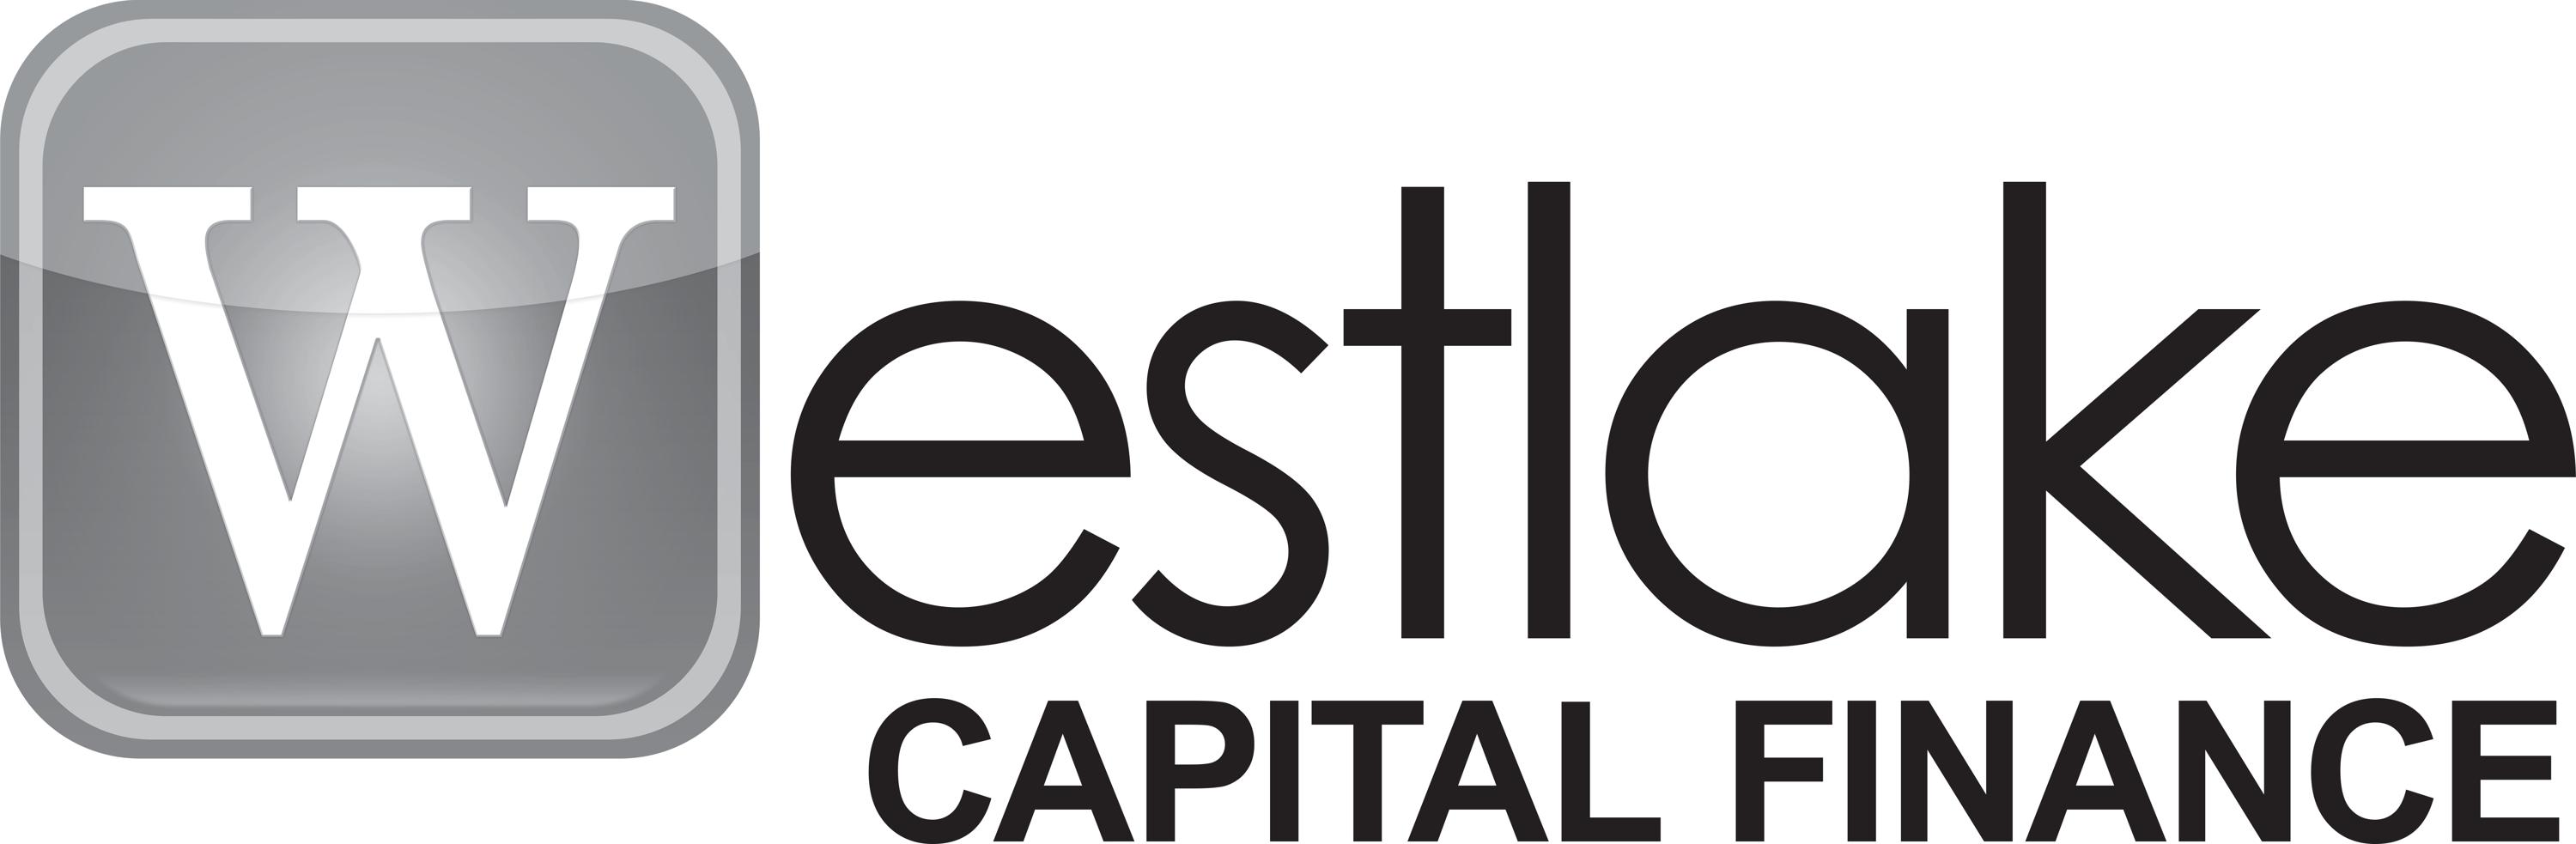 Westlake Financial Services Launches Commercial Real Estate Lending